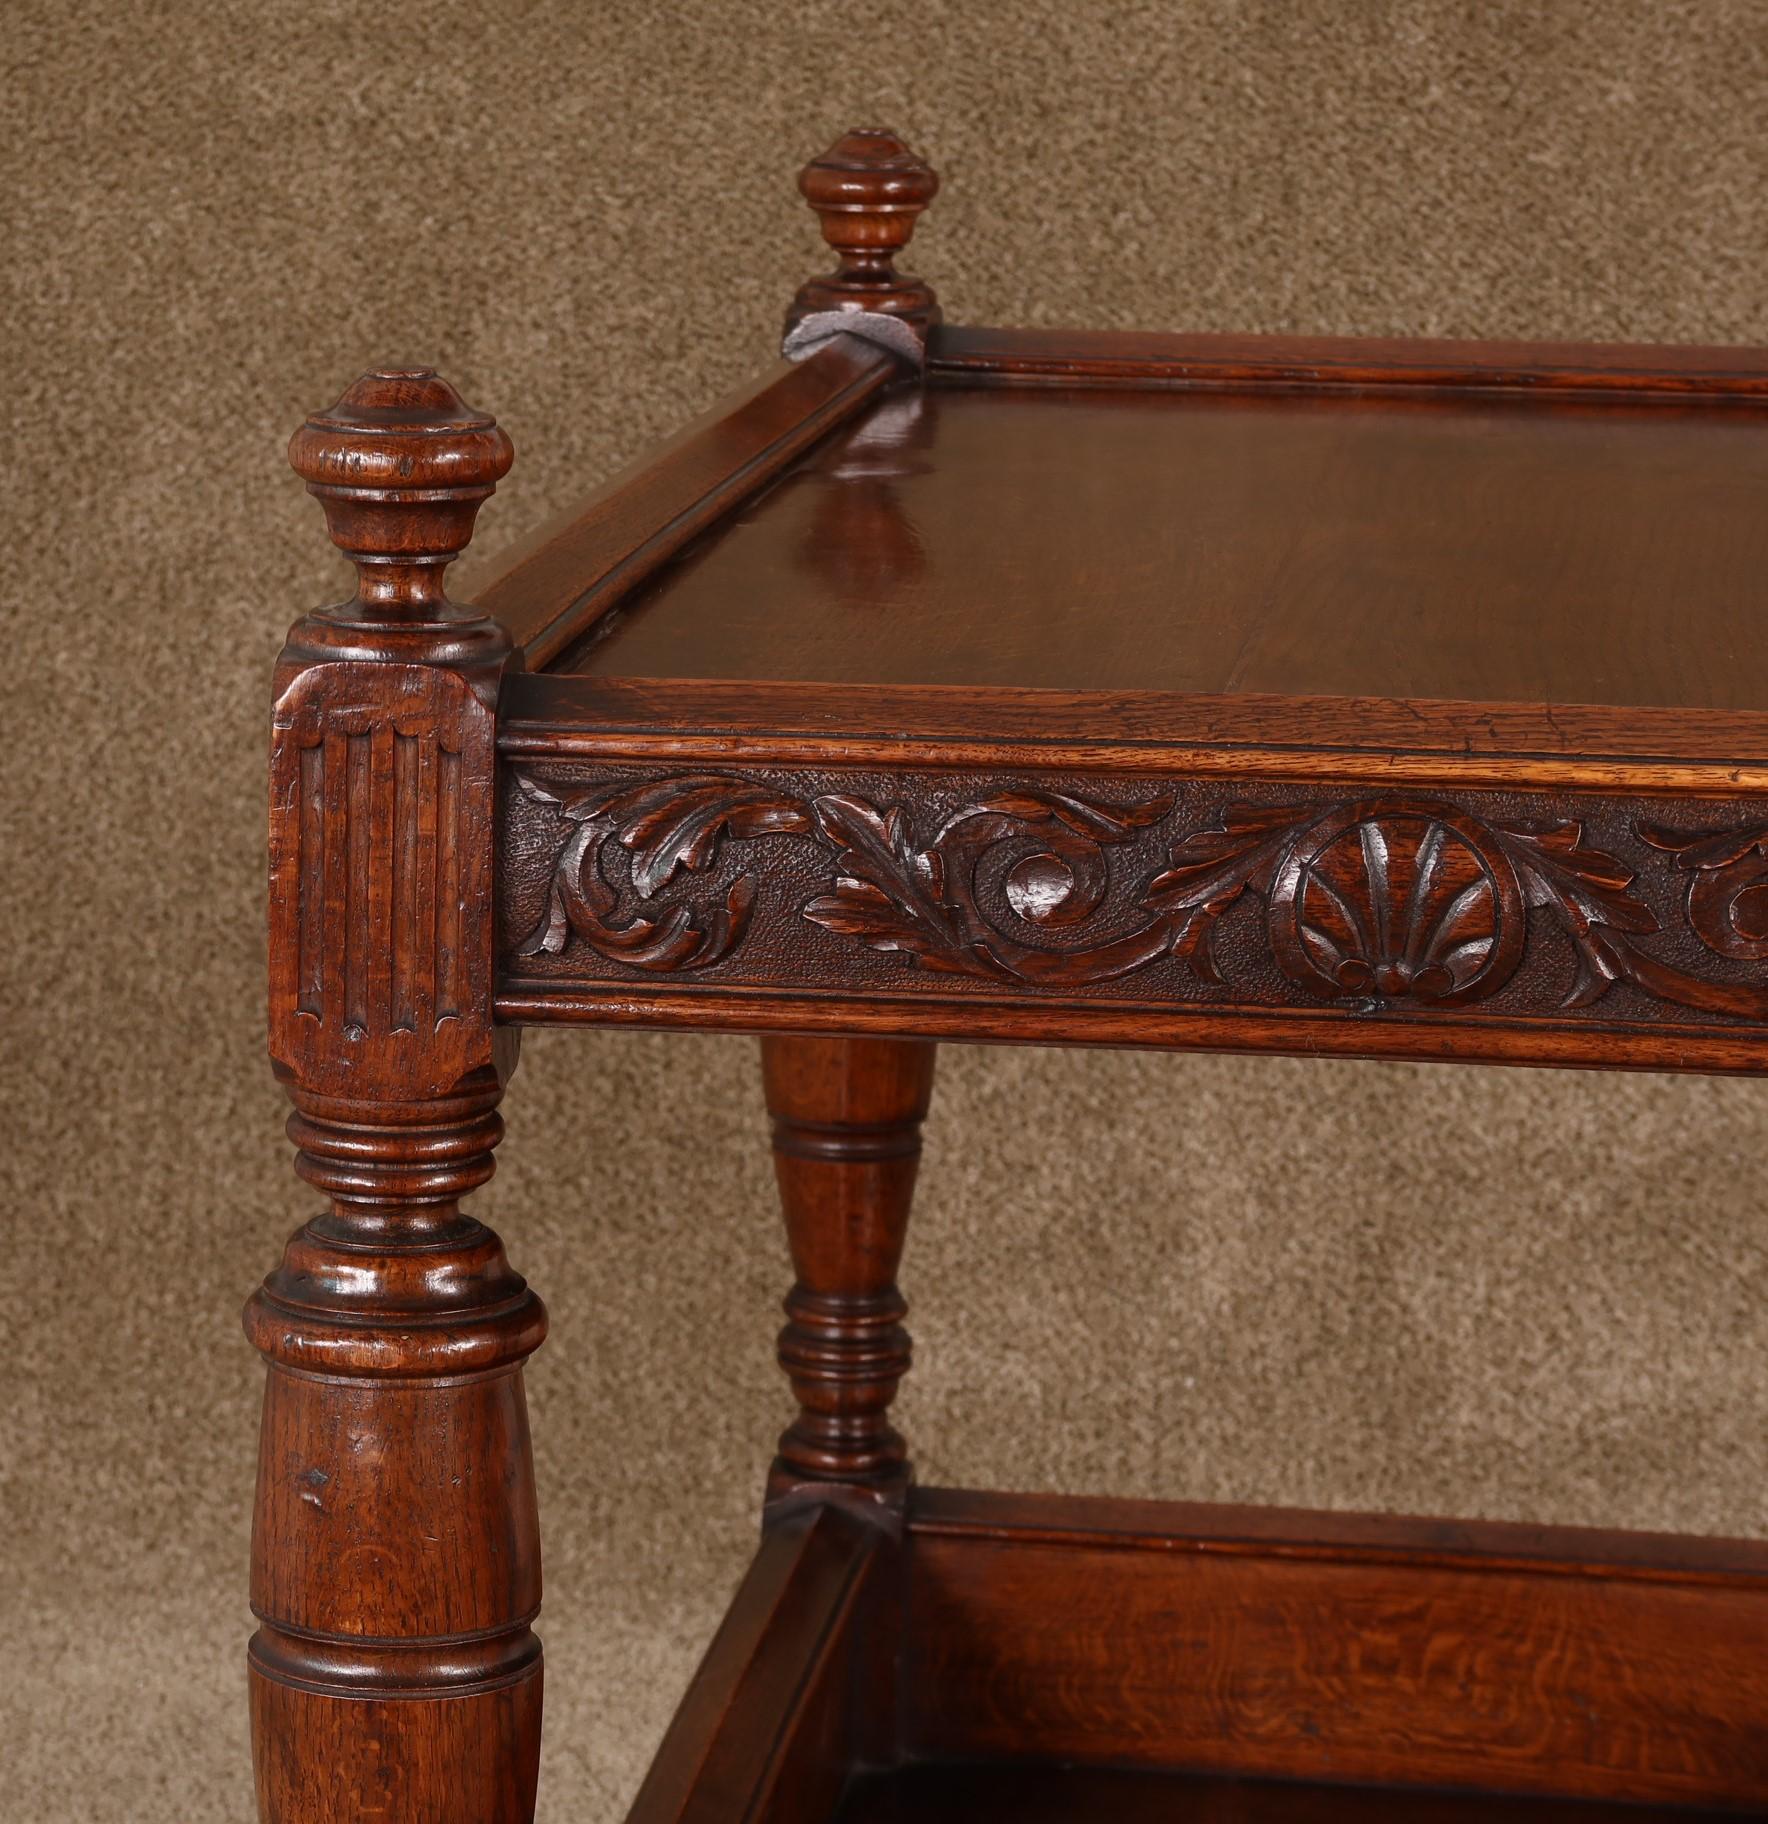 19th Century English Tudor Revival Oak Server with Exceptional Carvings, circa 1890 For Sale